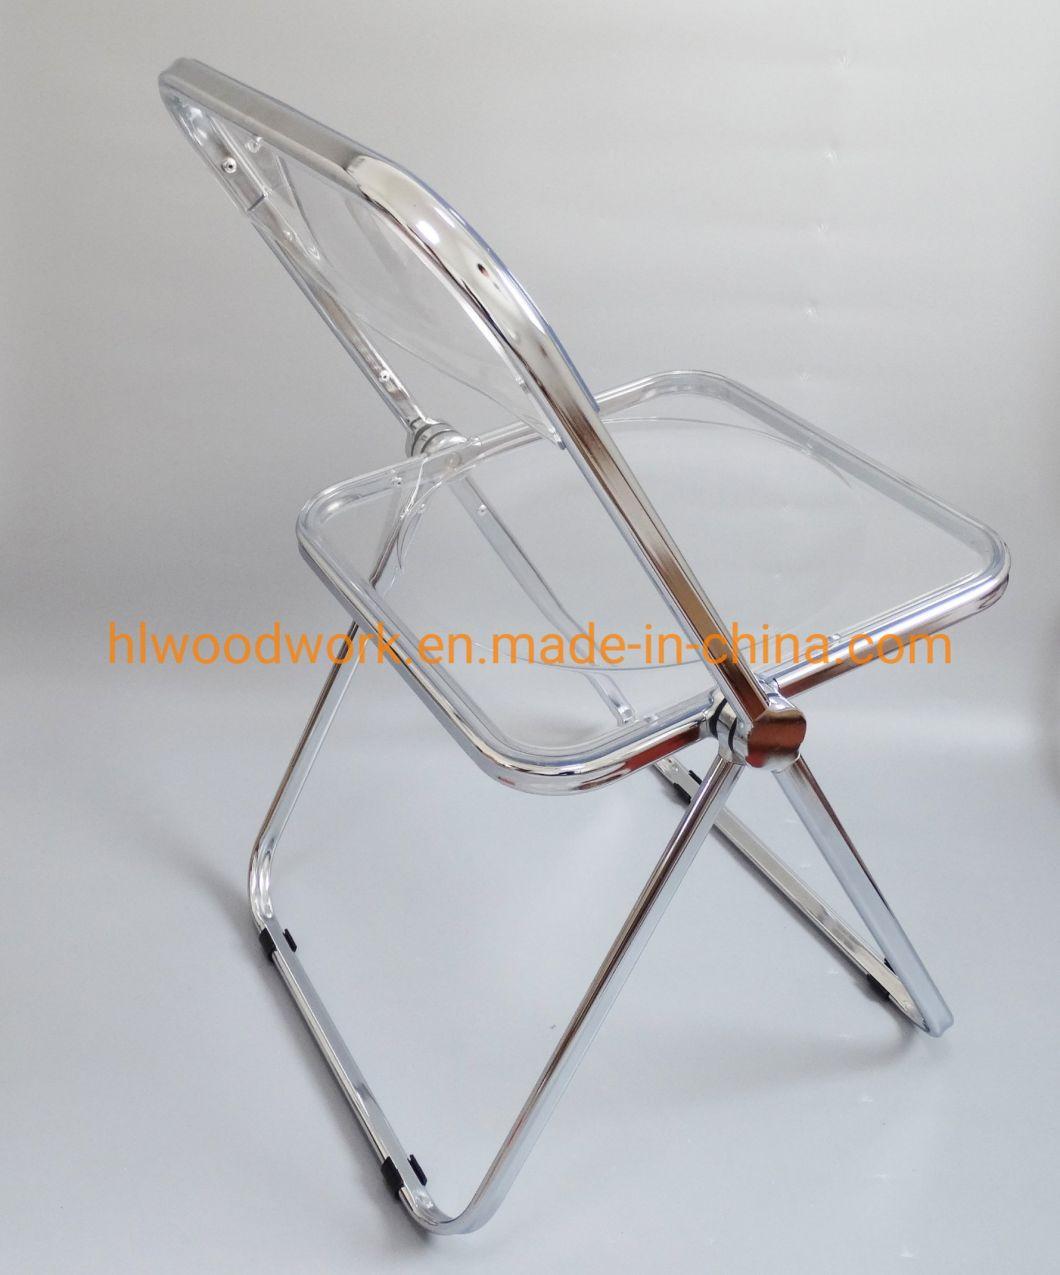 Modern Transparent Black Folding Chair PC Plastic Outdoor Chair Chrome Frame Office Bar Dining Leisure Banquet Wedding Meeting Chair Plastic Dining Chair